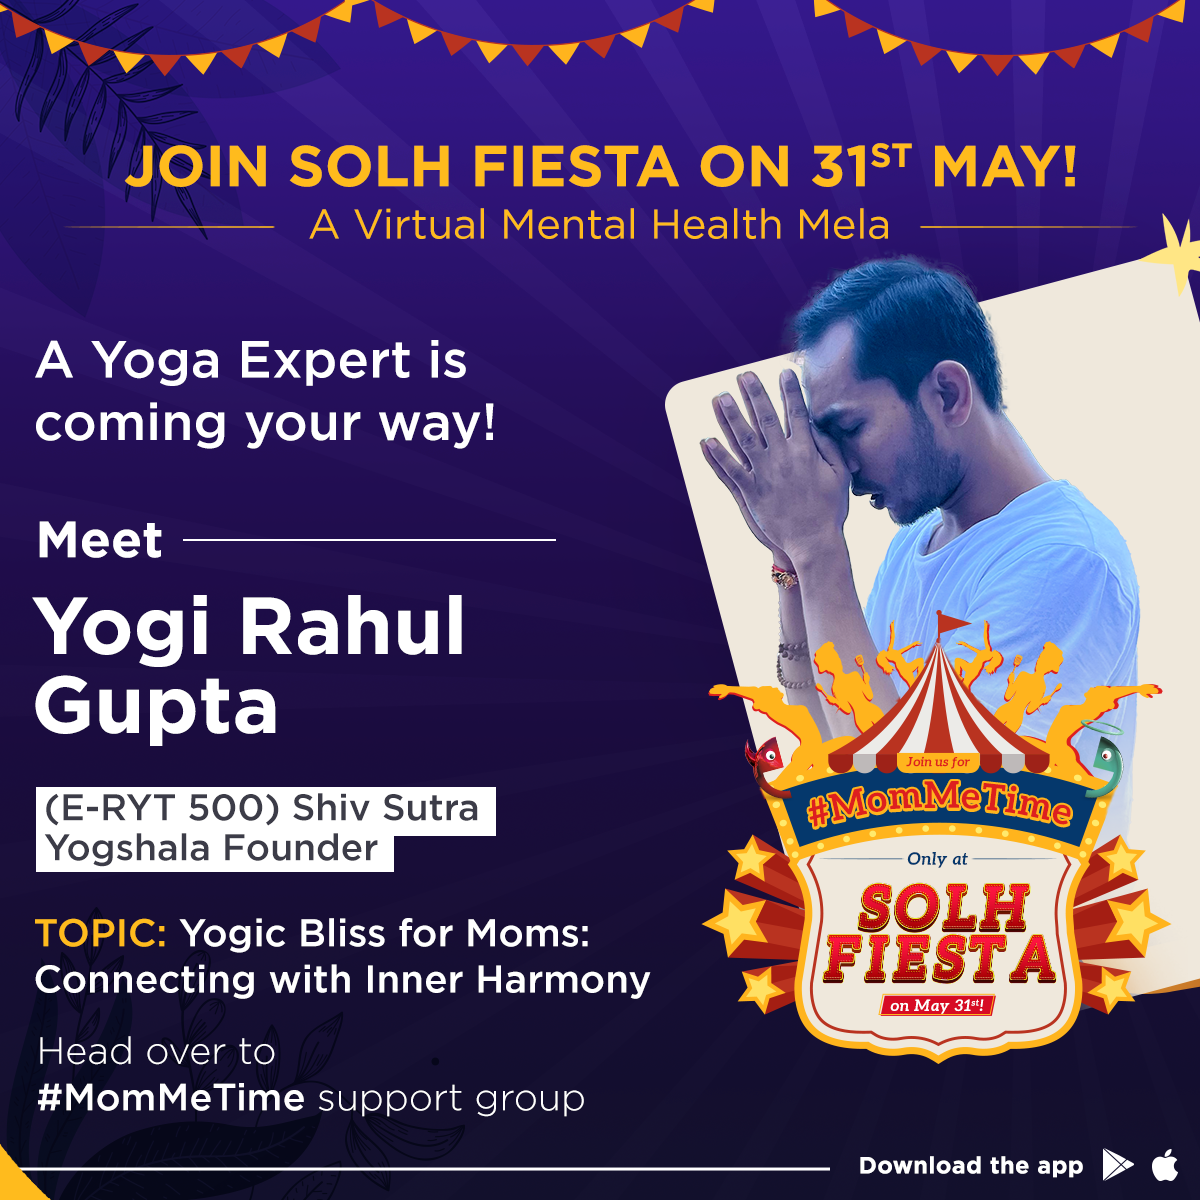 Yogic Bliss for Moms by Rahul Gupta | Solh Fiesta, Online Event